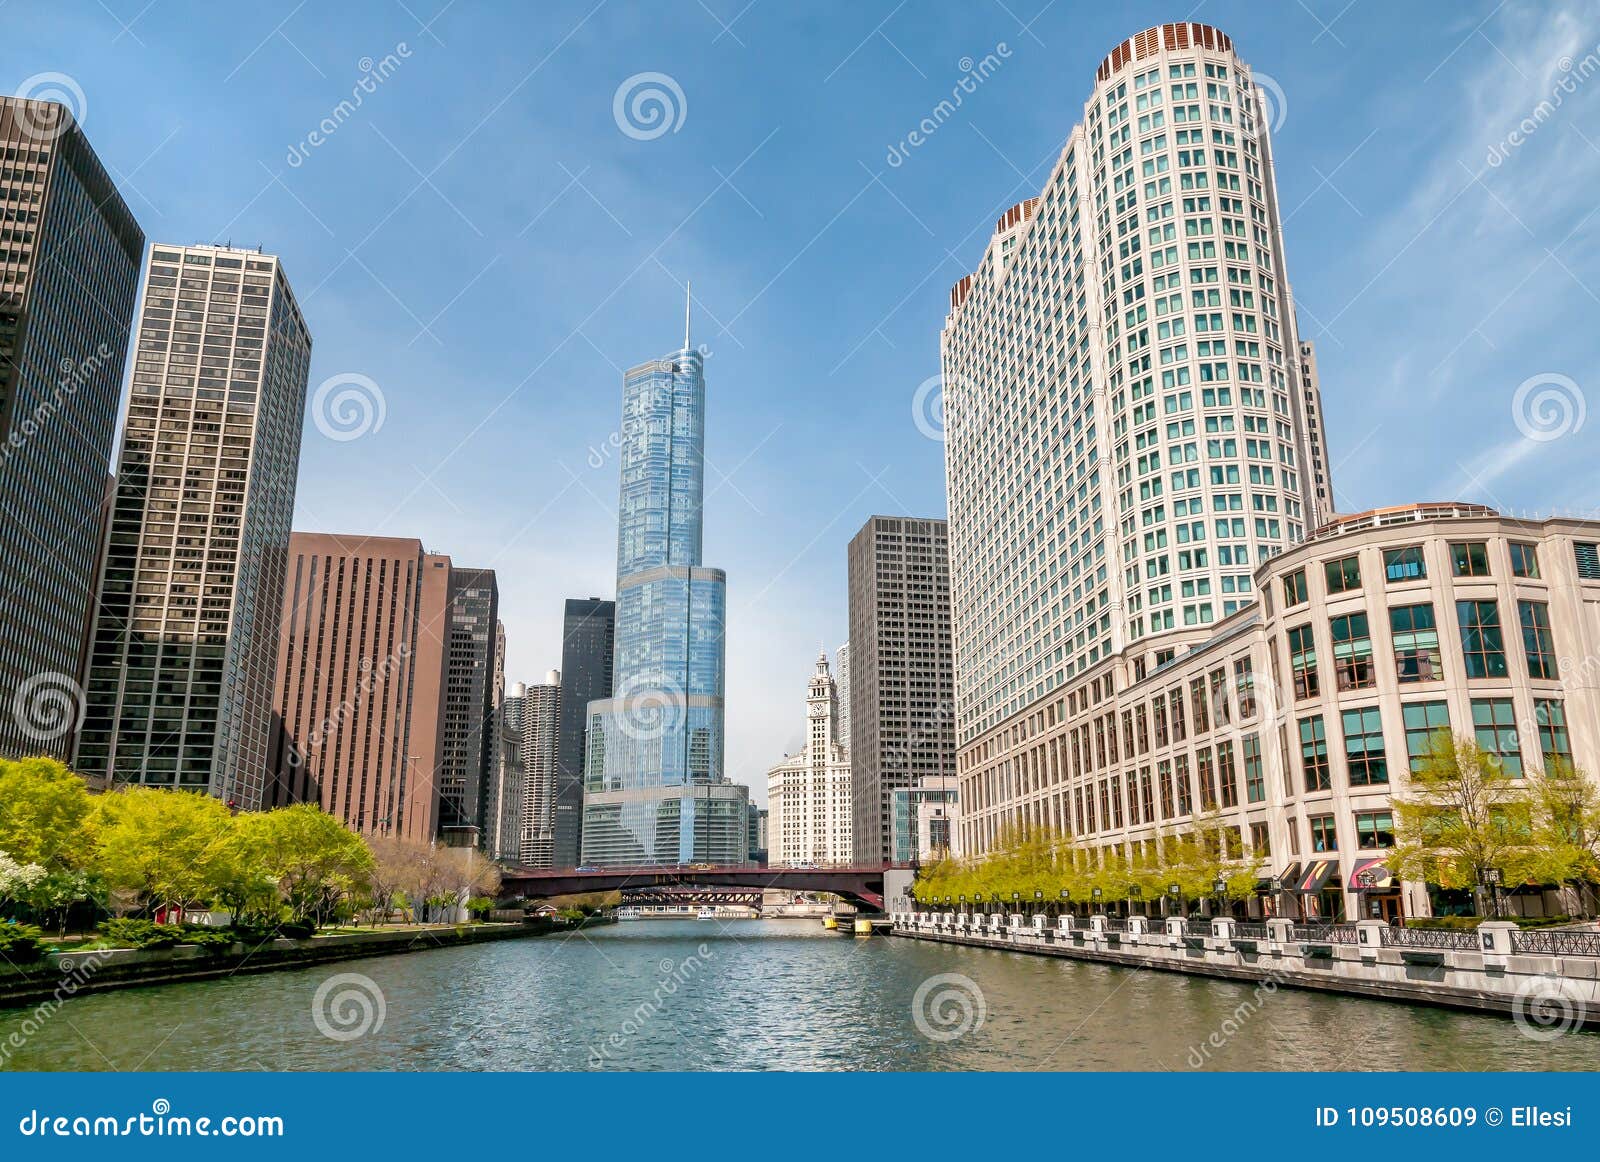 view of donald trump tower and skyscrapers from chicago river in center of chicago, usa